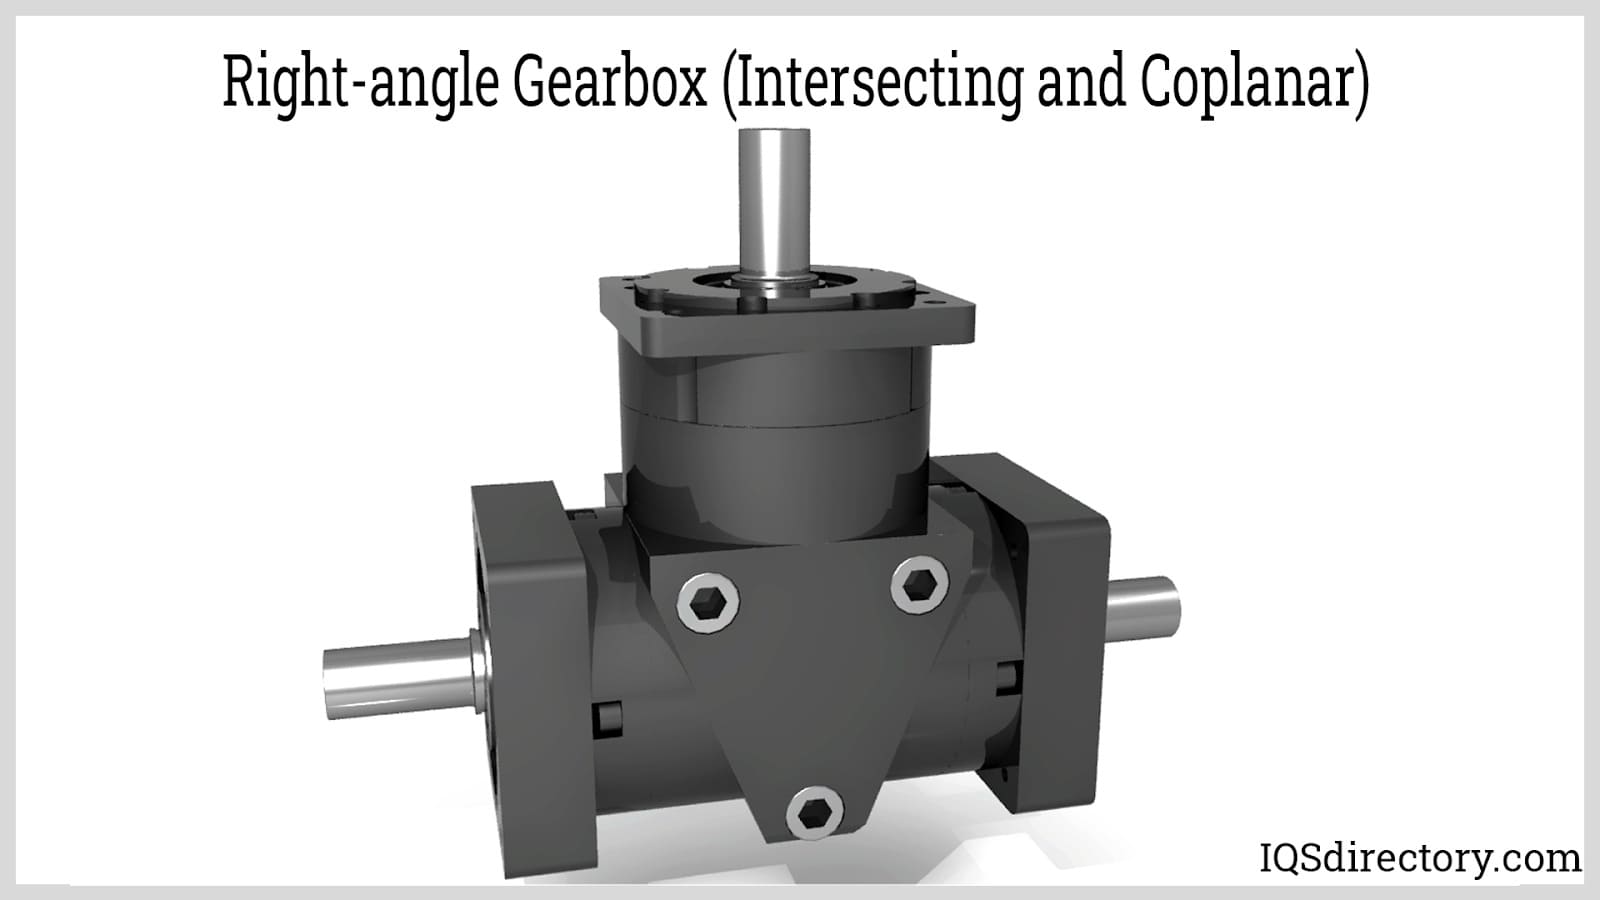 Right-angle Gearbox (Intersecting and Coplanar)